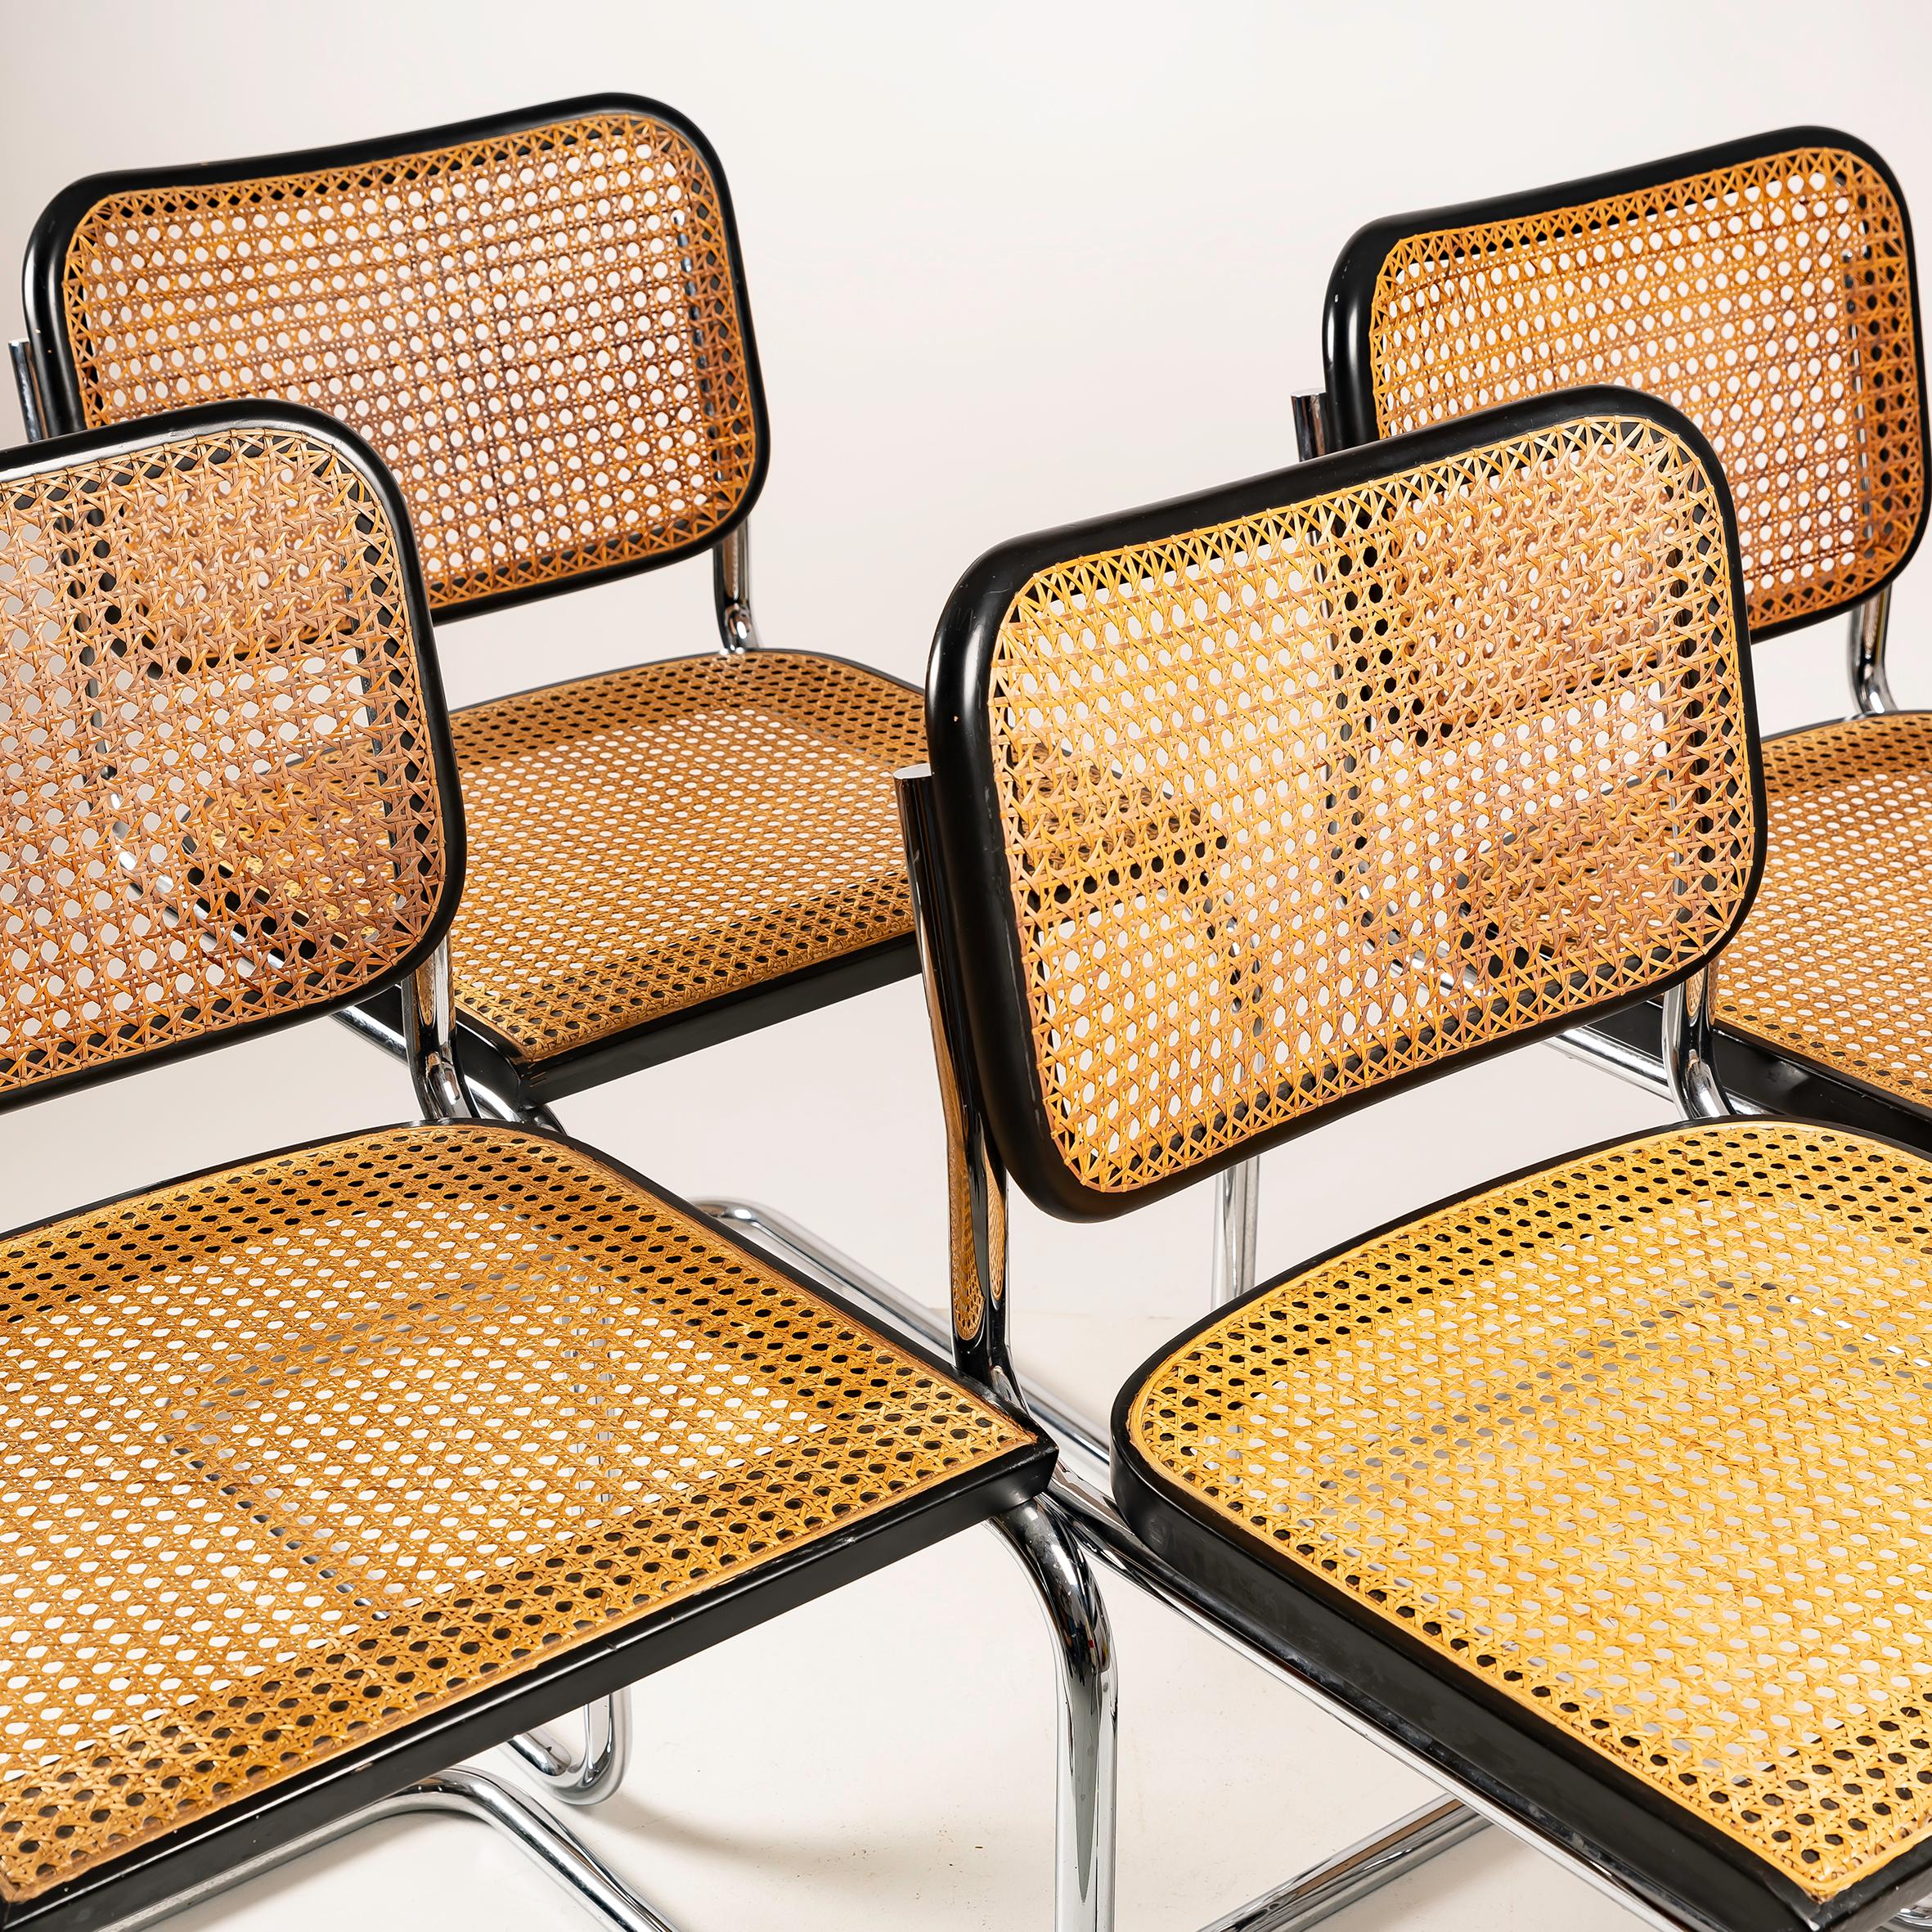 Elevate your dining experience with the iconic Set of 4 B32 Cesca chairs, designed by the visionary Marcel Breuer for Gavina. Renowned as a masterpiece of modern design, these chairs epitomize the Bauhaus movement's principles of form following